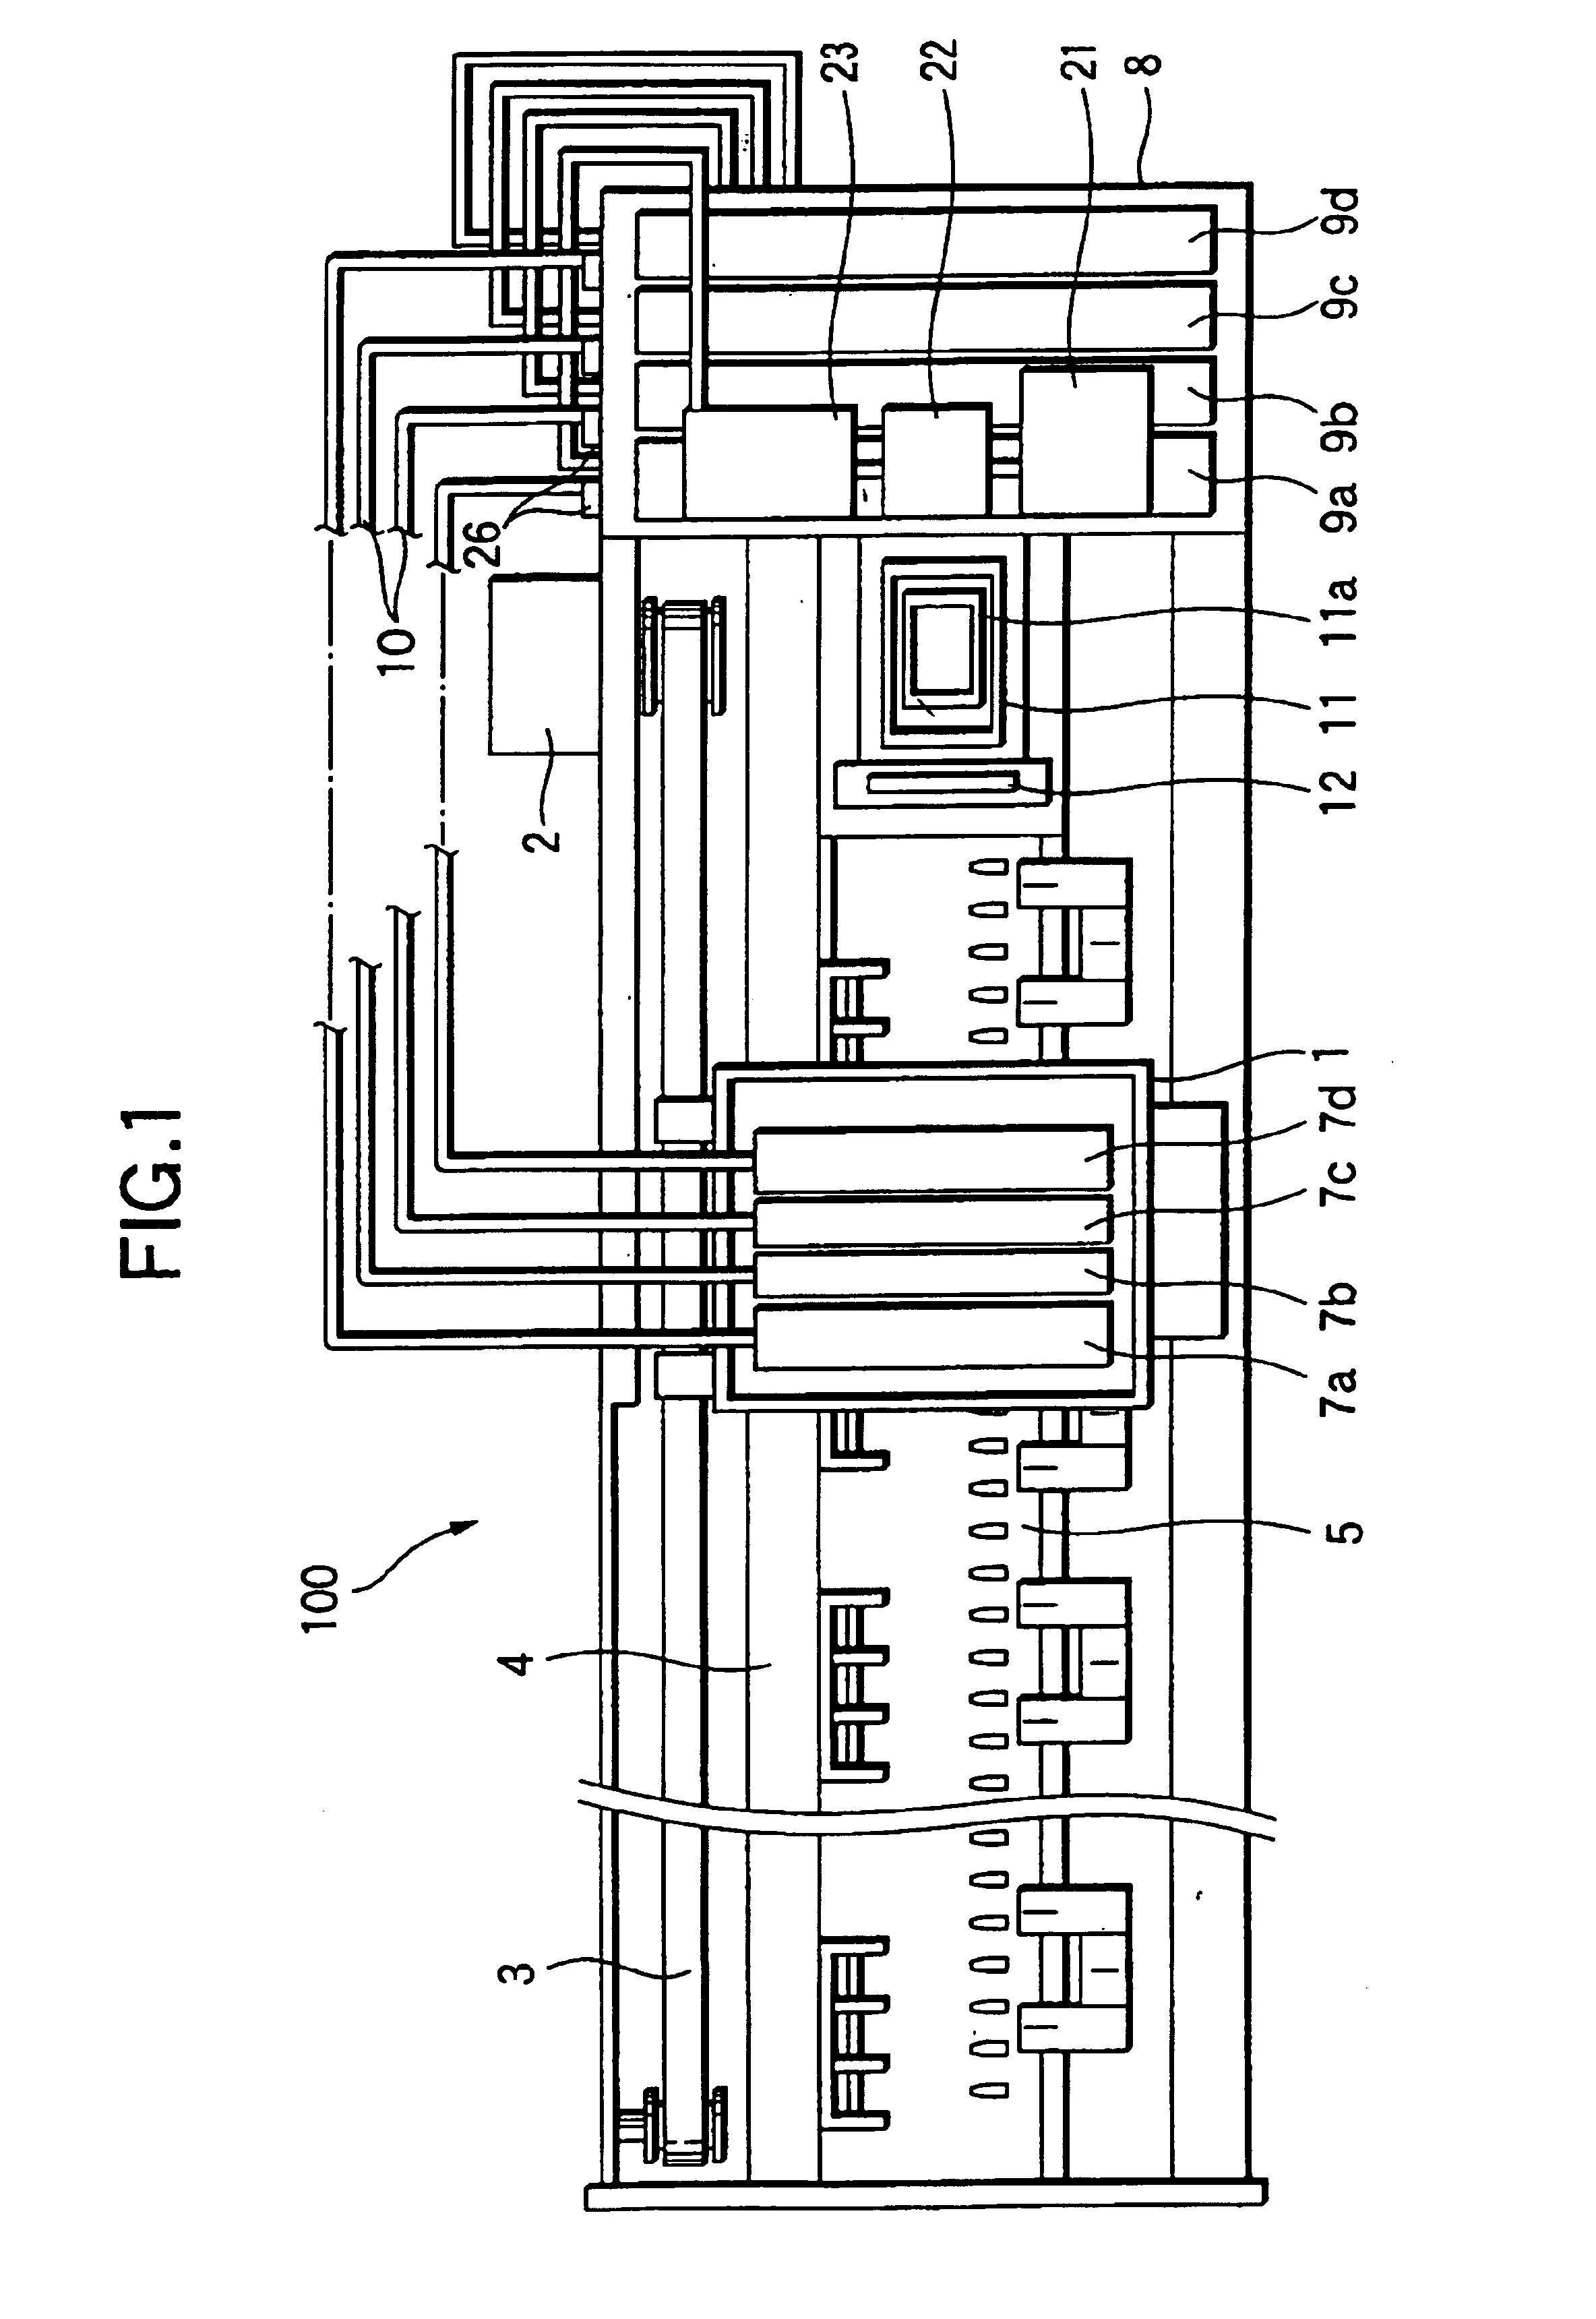 Ink jet type recording apparatus, ink type information setting method in the apparatus and ink cartridge used in the apparatus